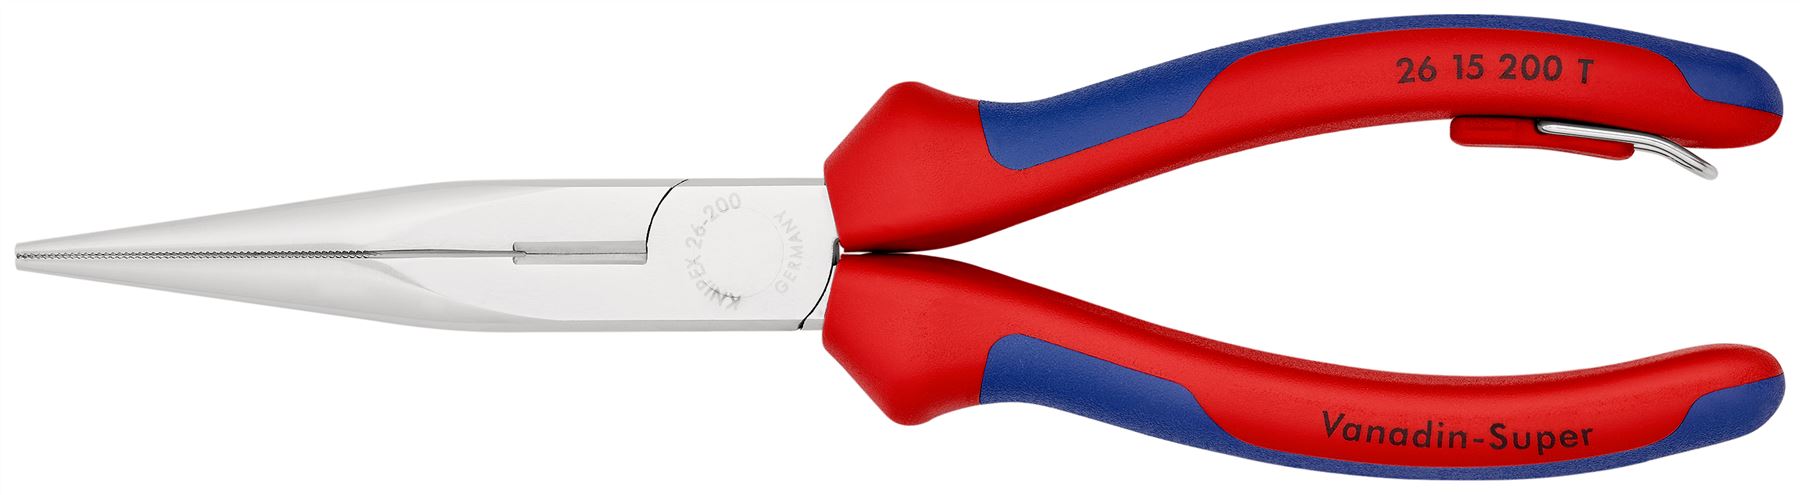 Knipex Snipe Nose Side Cutting Pliers Chrome 200mm Multi Component Grips with Tether Point 26 15 200 T